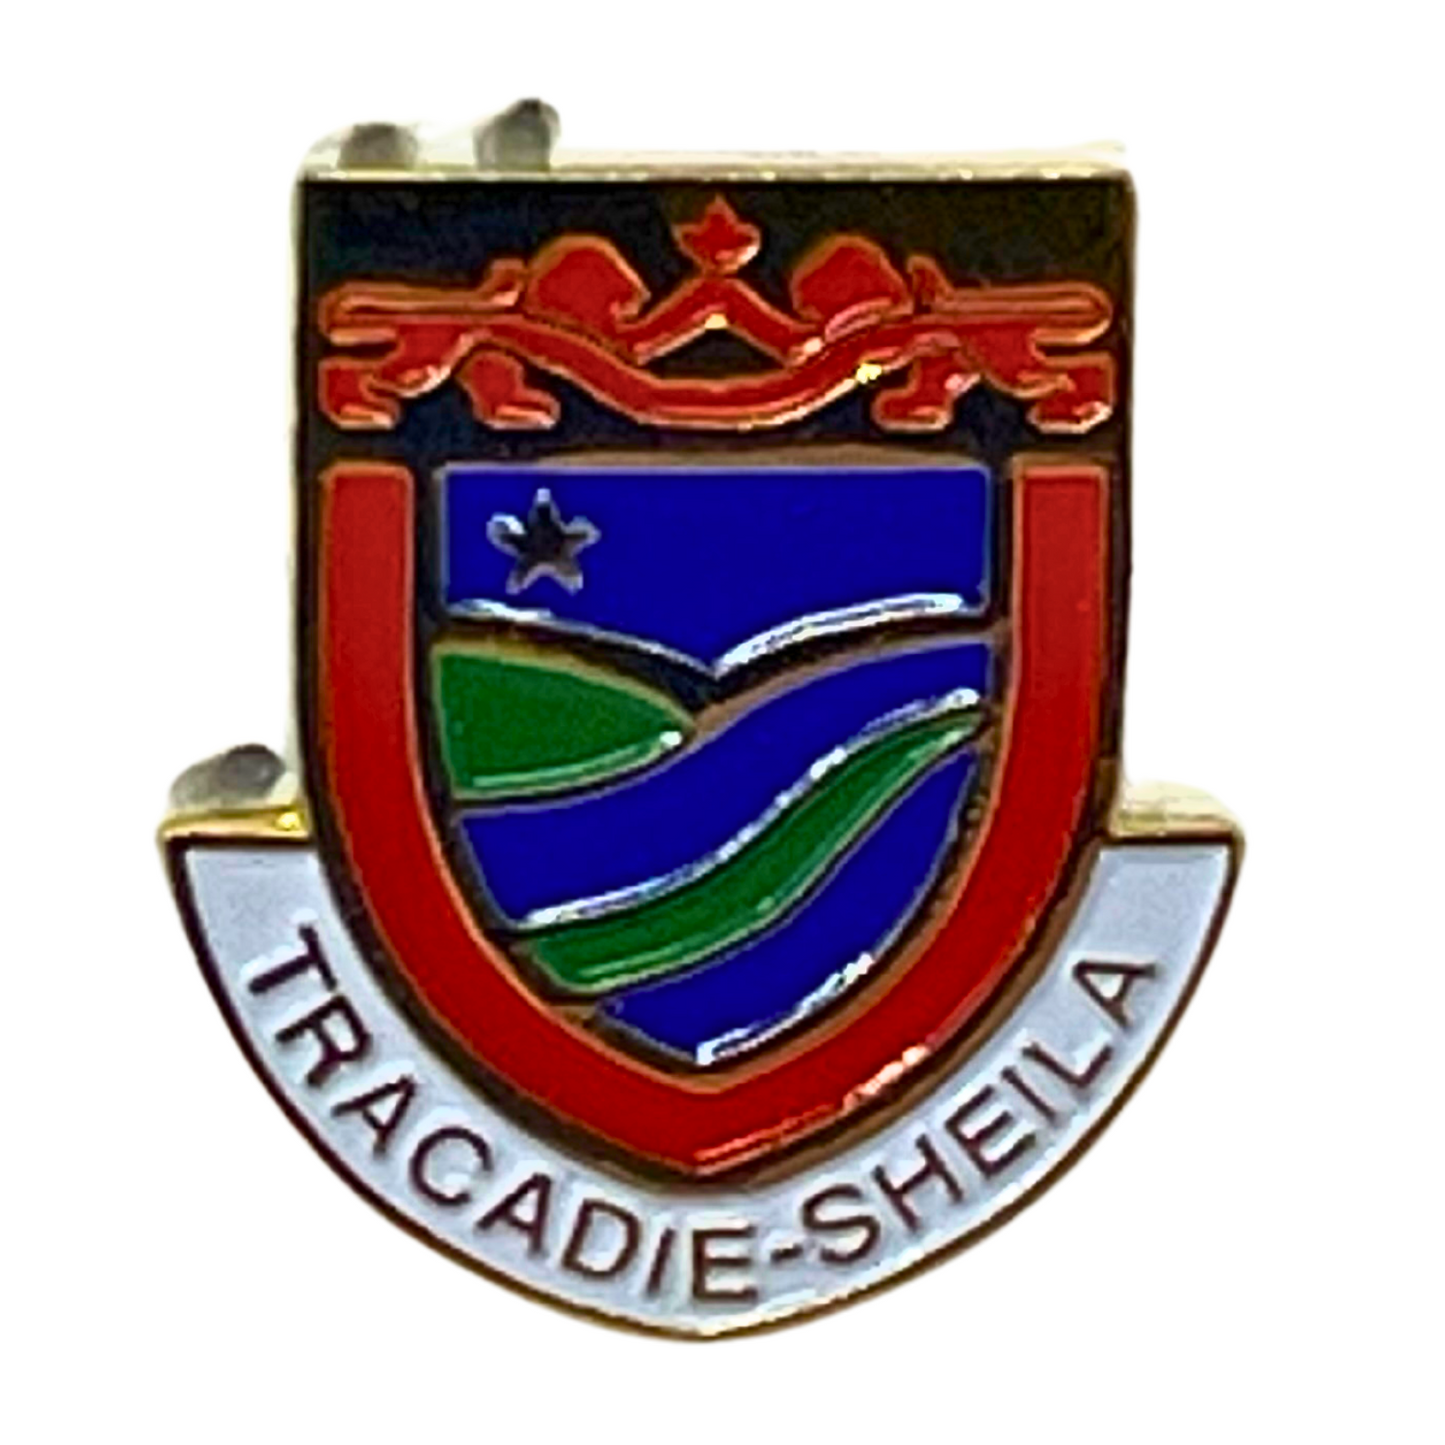 Town of Tracadie-Sheila New Brunswick Souvenir Cities & States Lapel Pin SP2